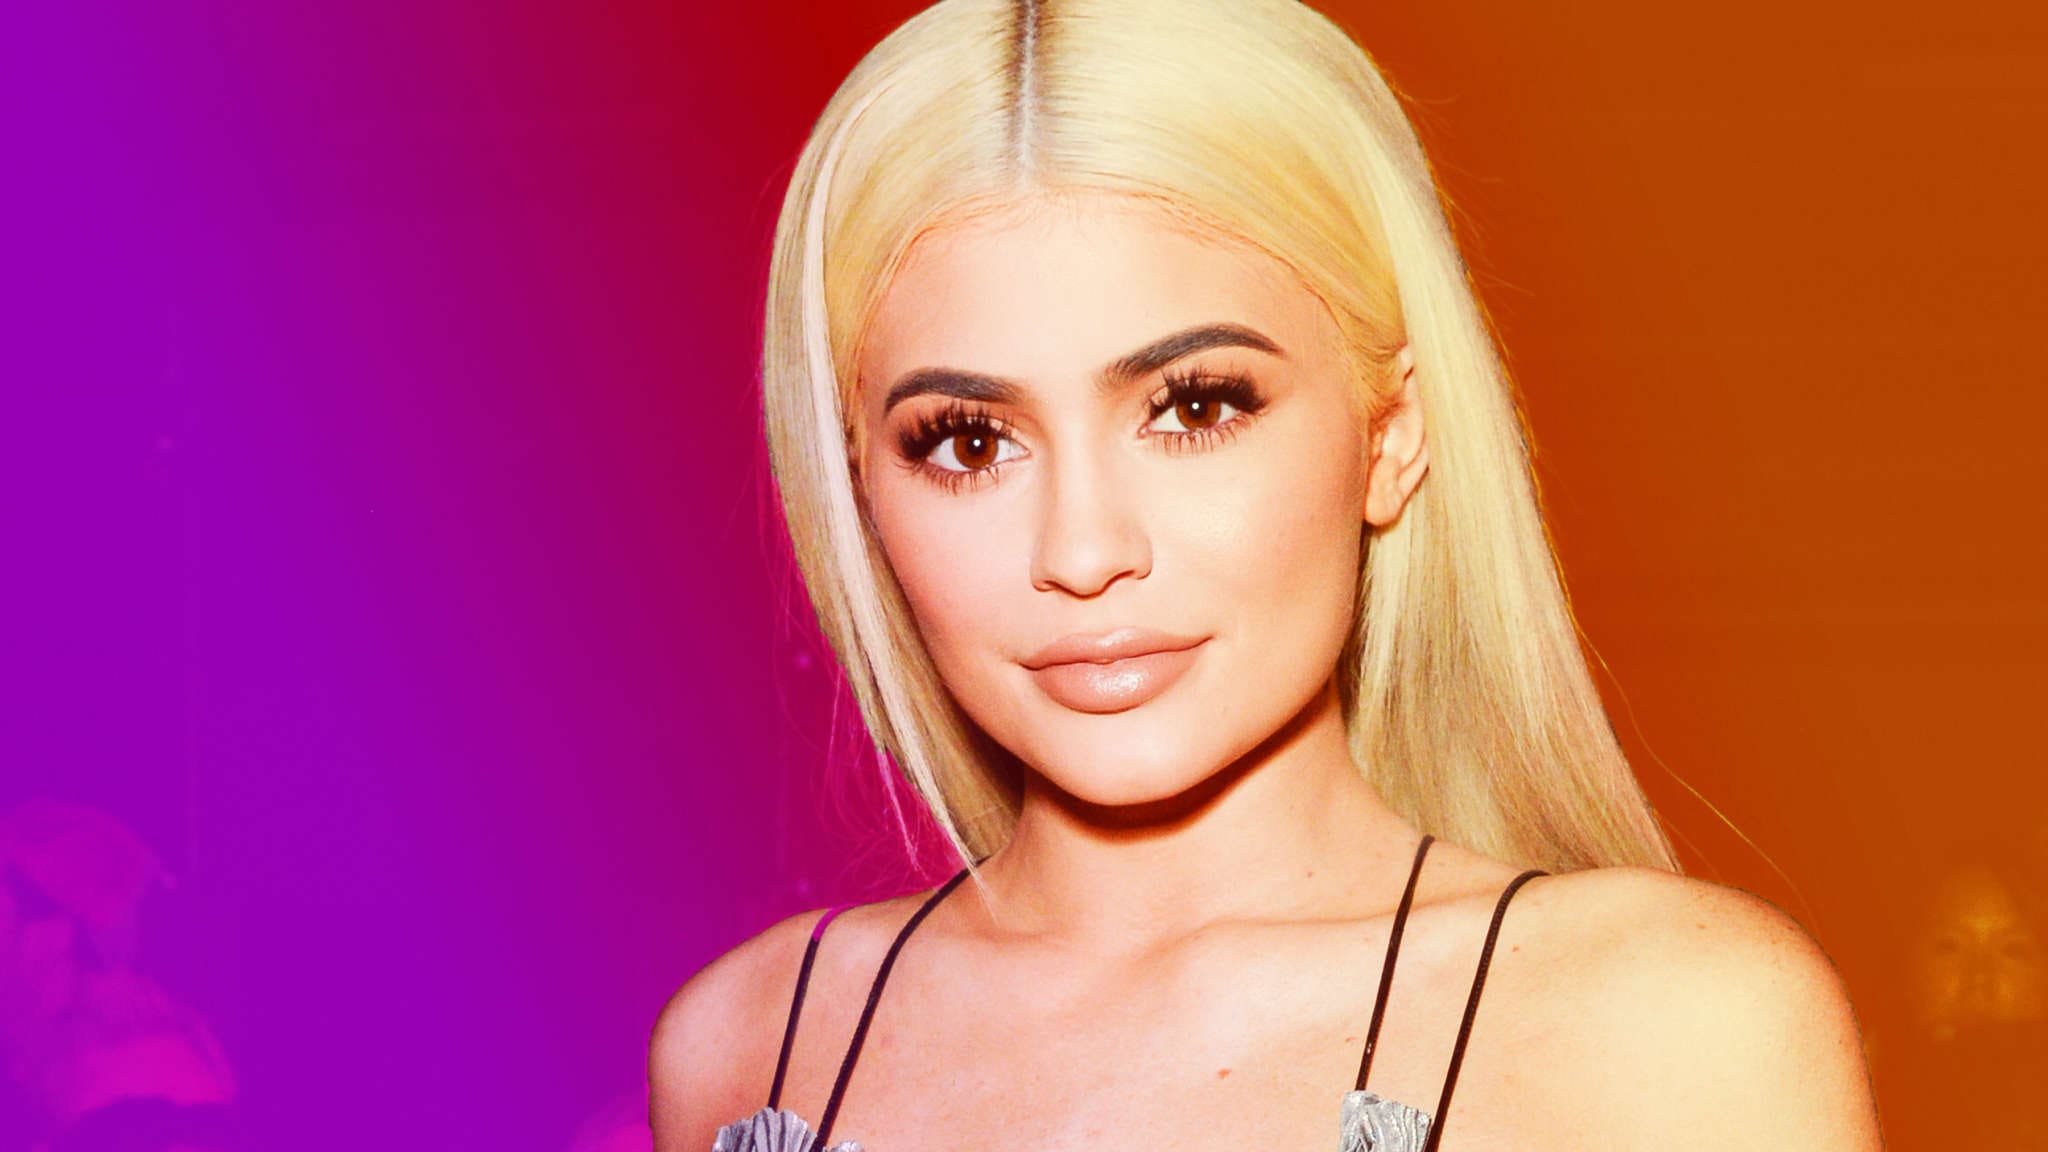 Kylie Jenner Celebrates Her 22nd Birthday And Some People Say She's Trying To Copy Rihanna's Dress - Check Out The Gift She Received From Travis Scott